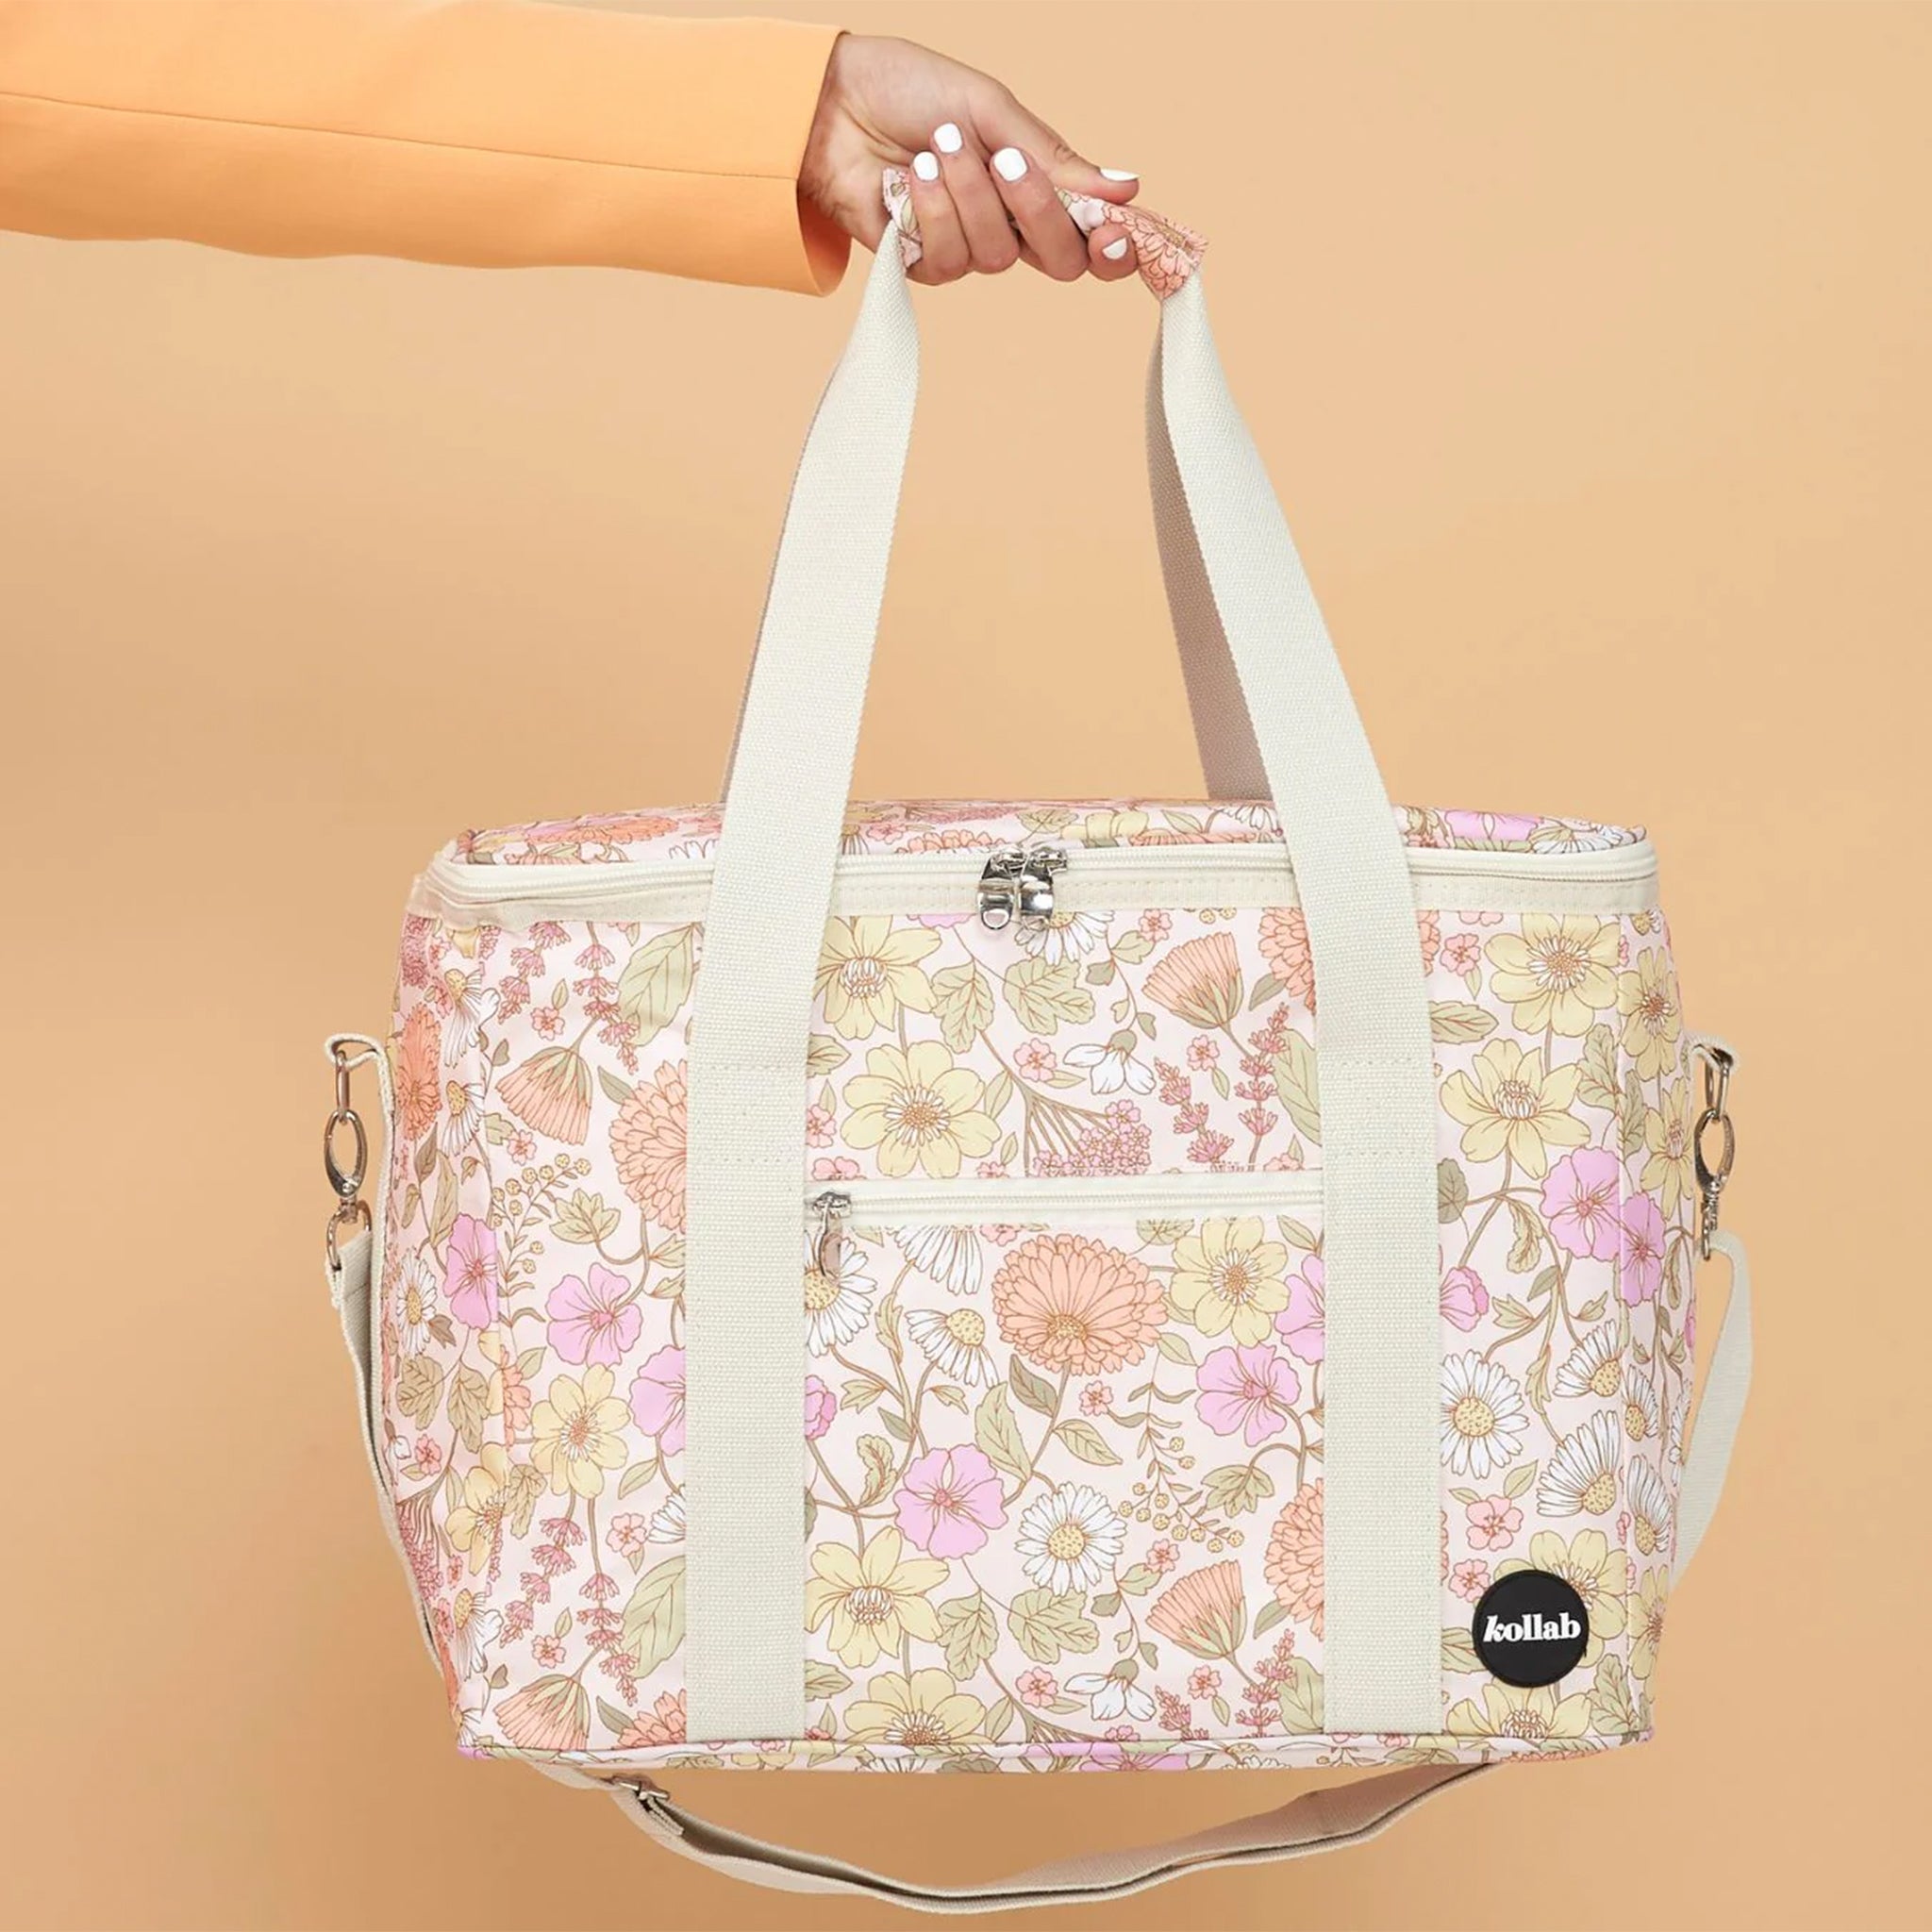 An ivory, floral print picnic bag with white straps and zippers.